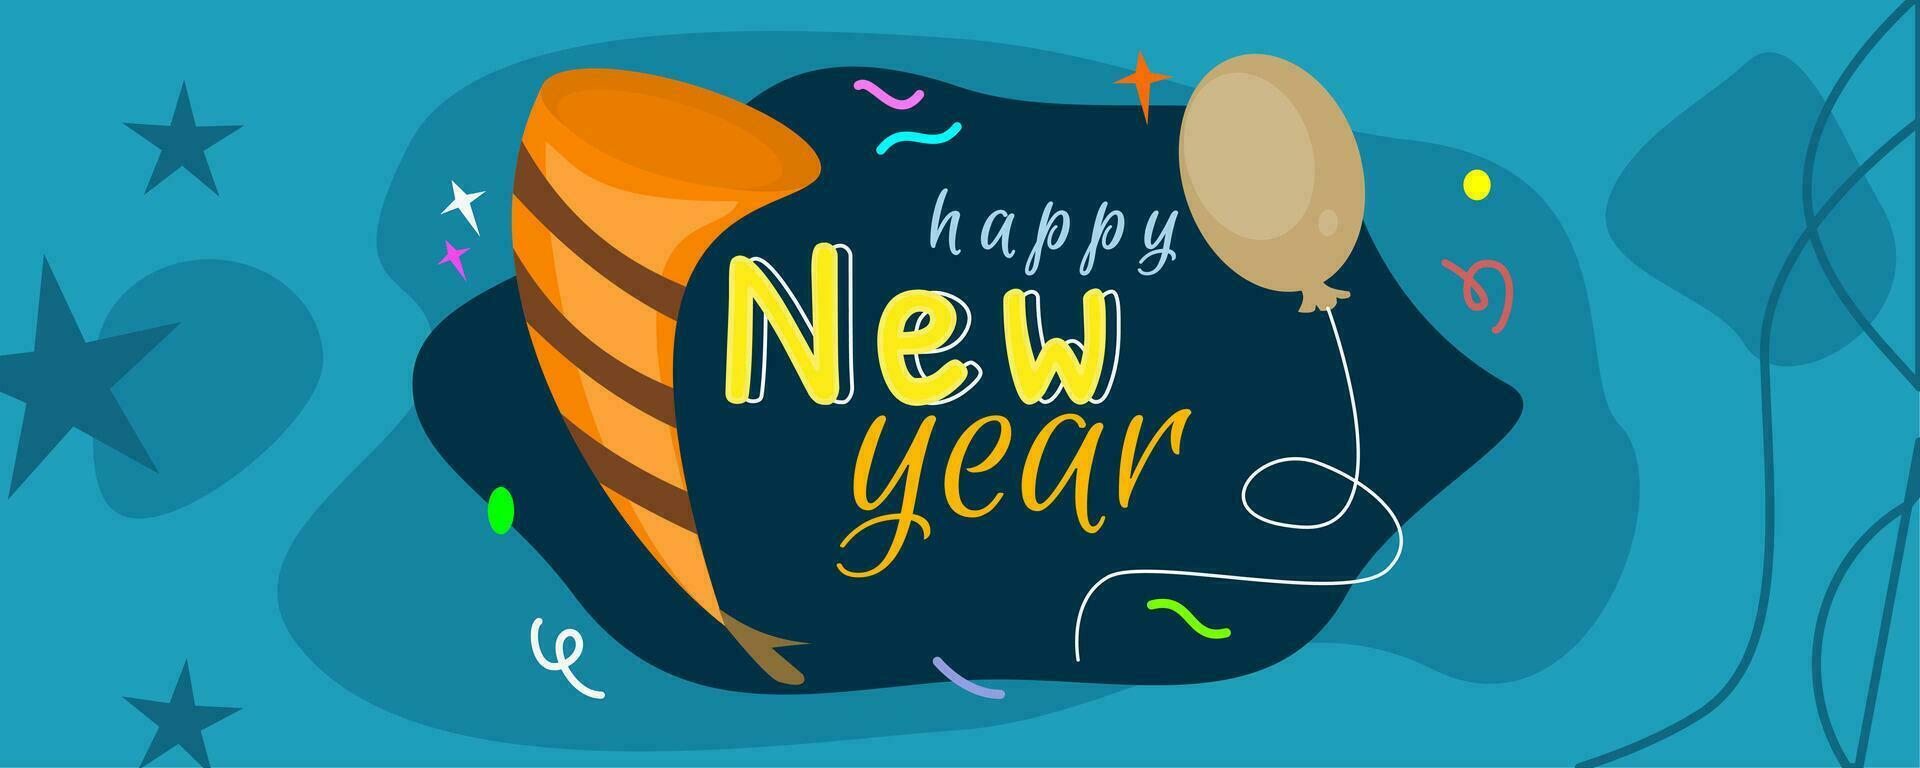 happy new year banner greetings with cone hat party and balloon vector